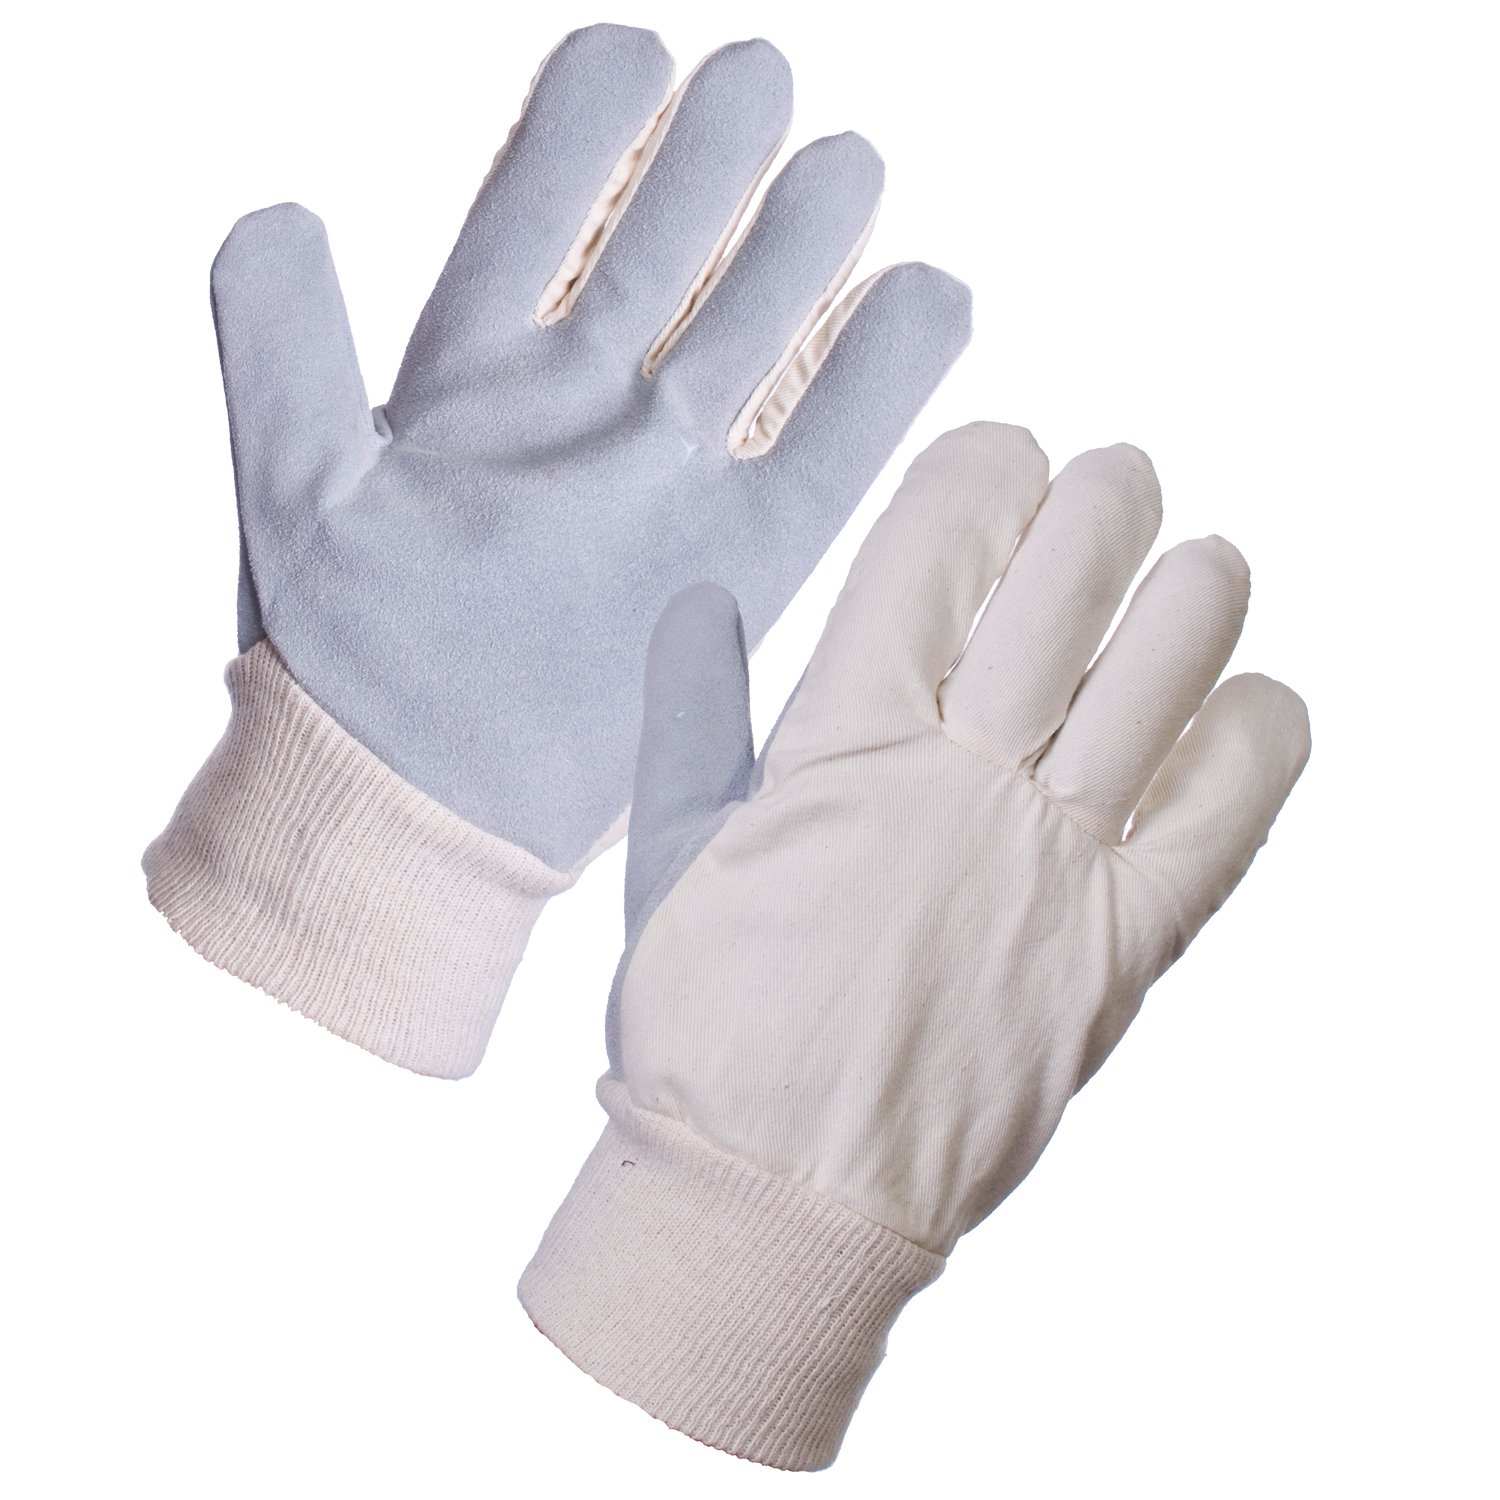 Supertouch Cotton Chrome Leather Gloves